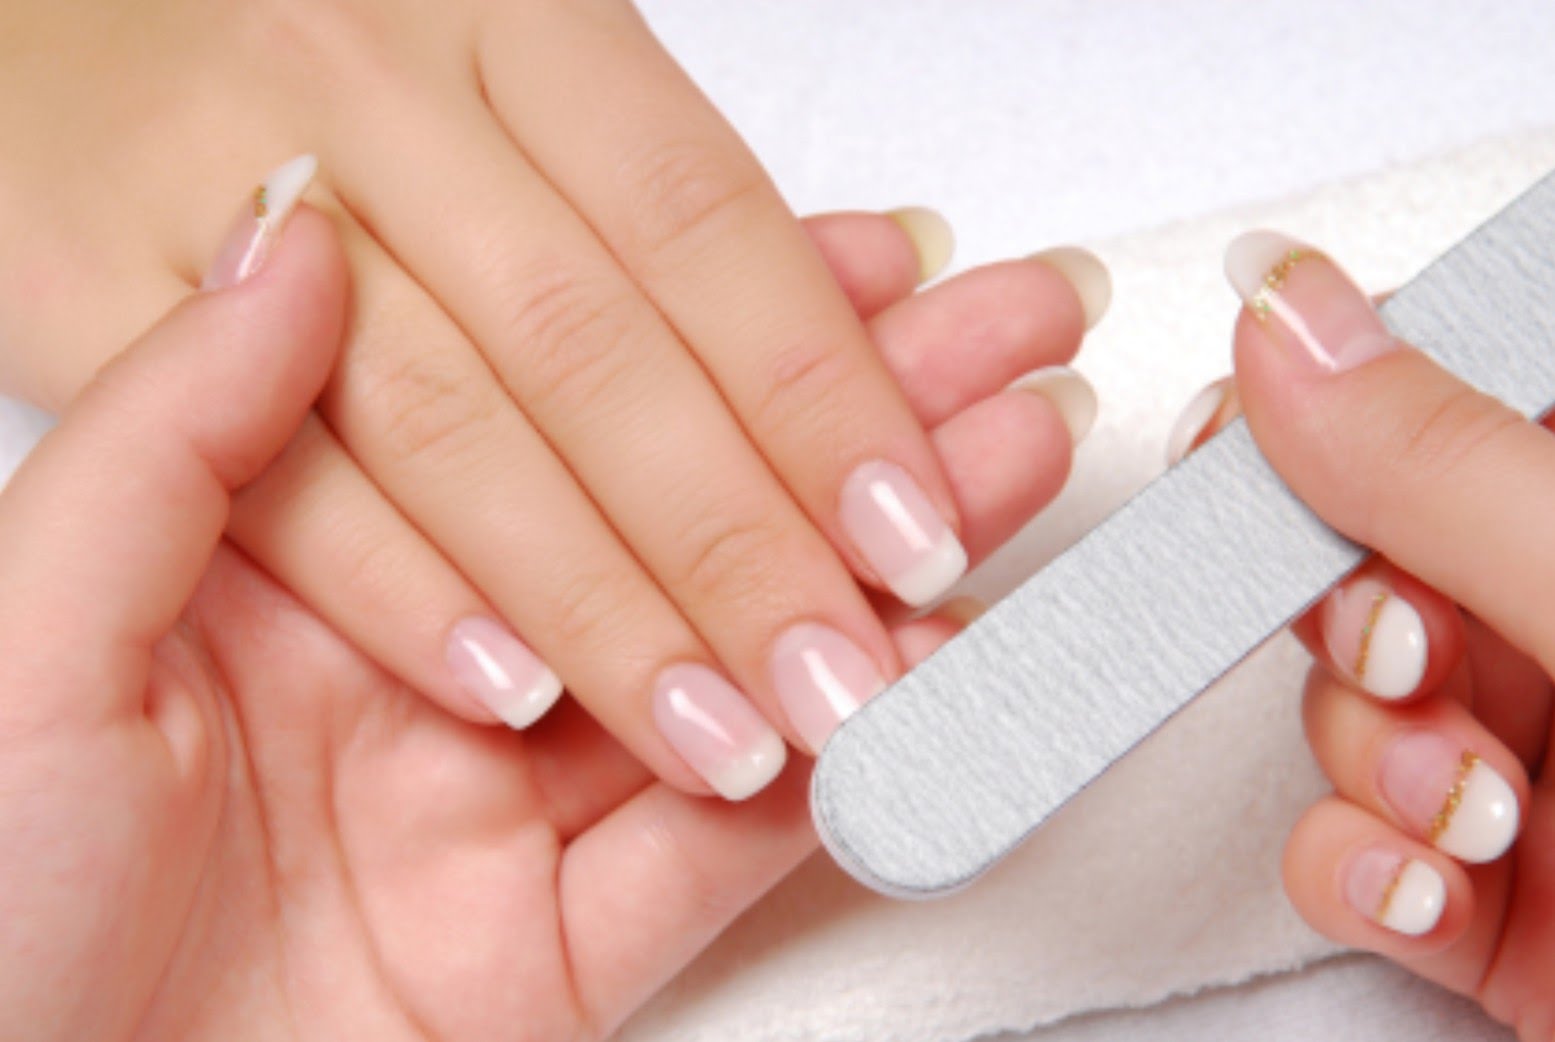 2. 10 Simple Steps for a Perfect At-Home Manicure - wide 10